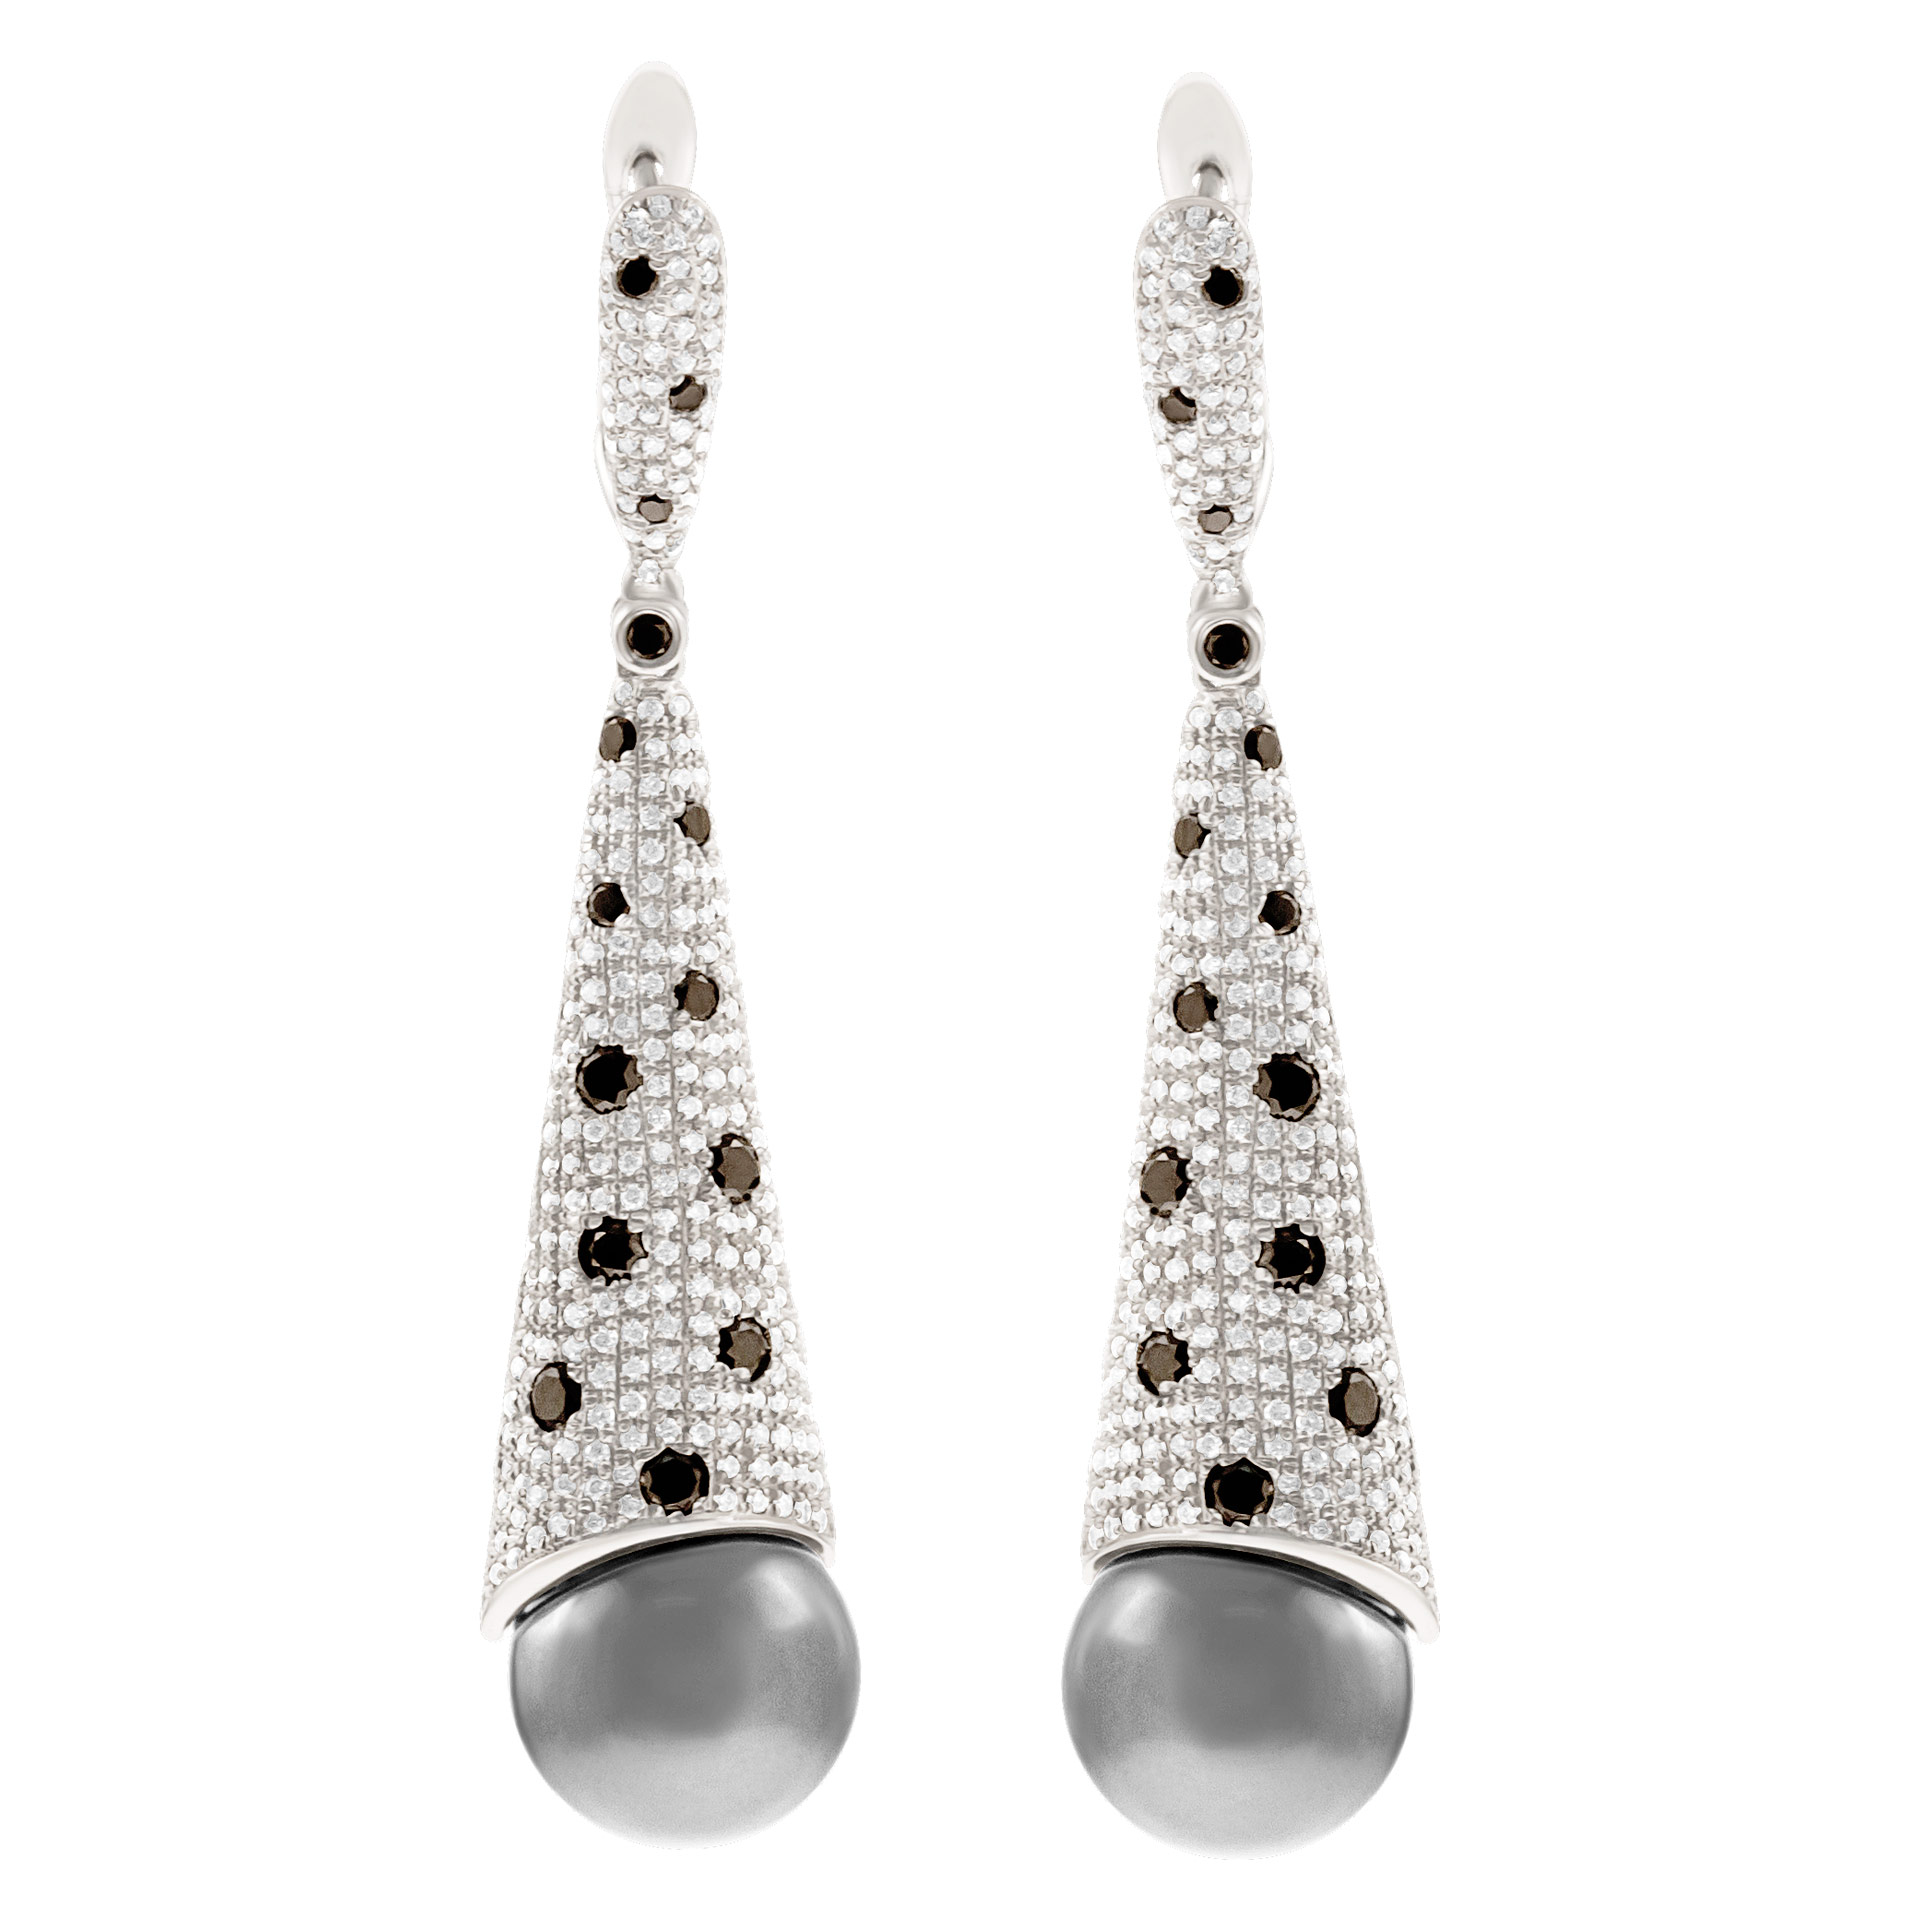 Pearl and diamonds earrings in 18k white gold with app. 1.67 carats in diamonds